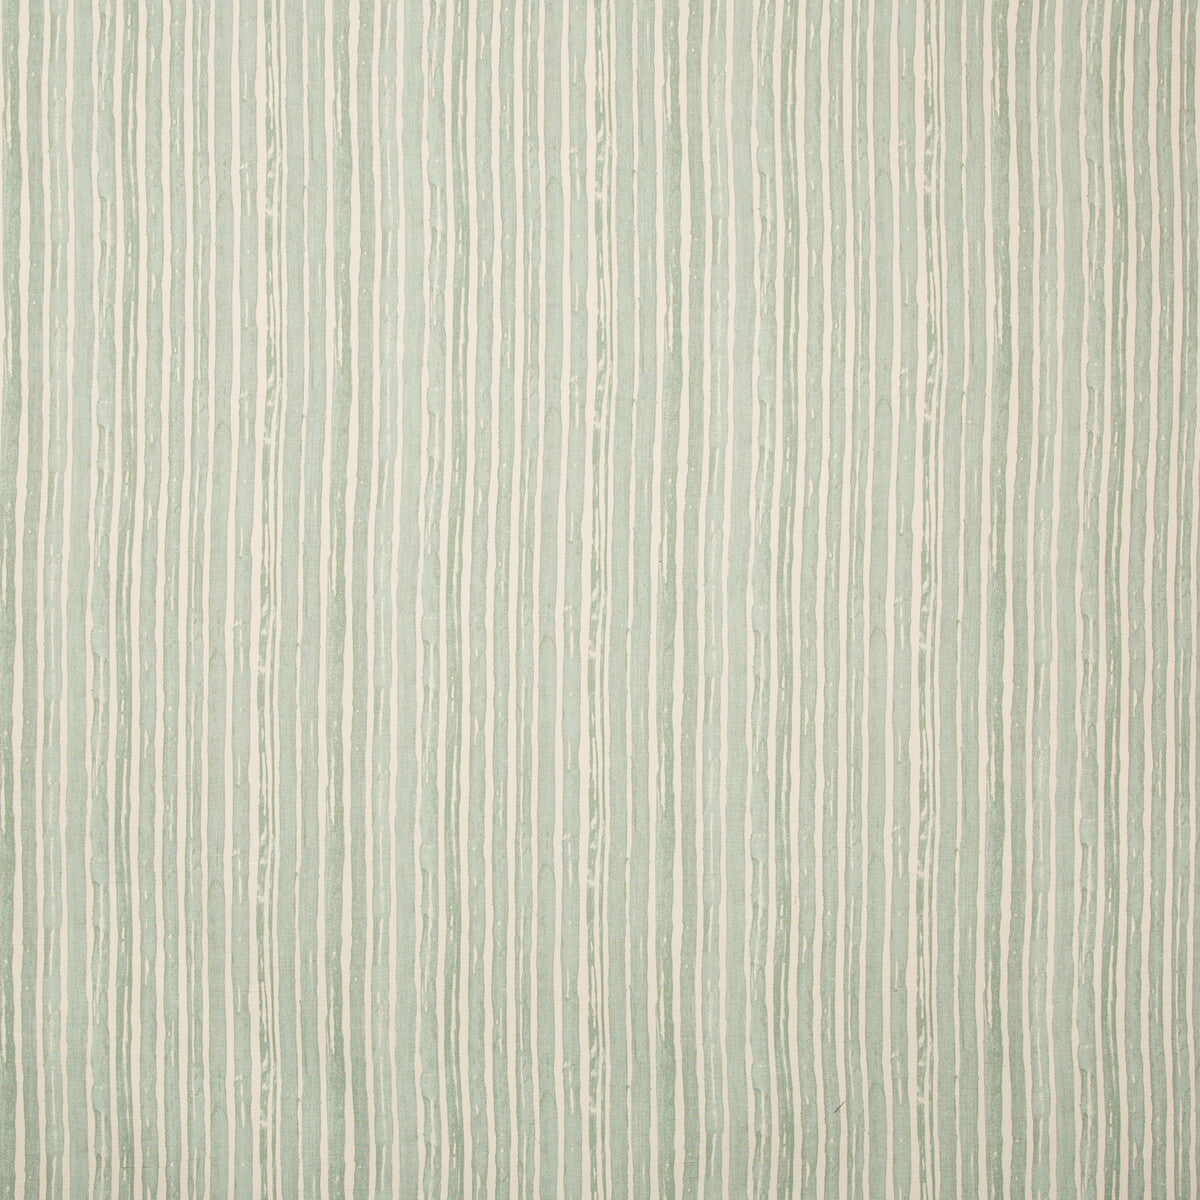 Benson Stripe fabric in lakeland color - pattern 2019151.13.0 - by Lee Jofa in the Carrier And Company collection